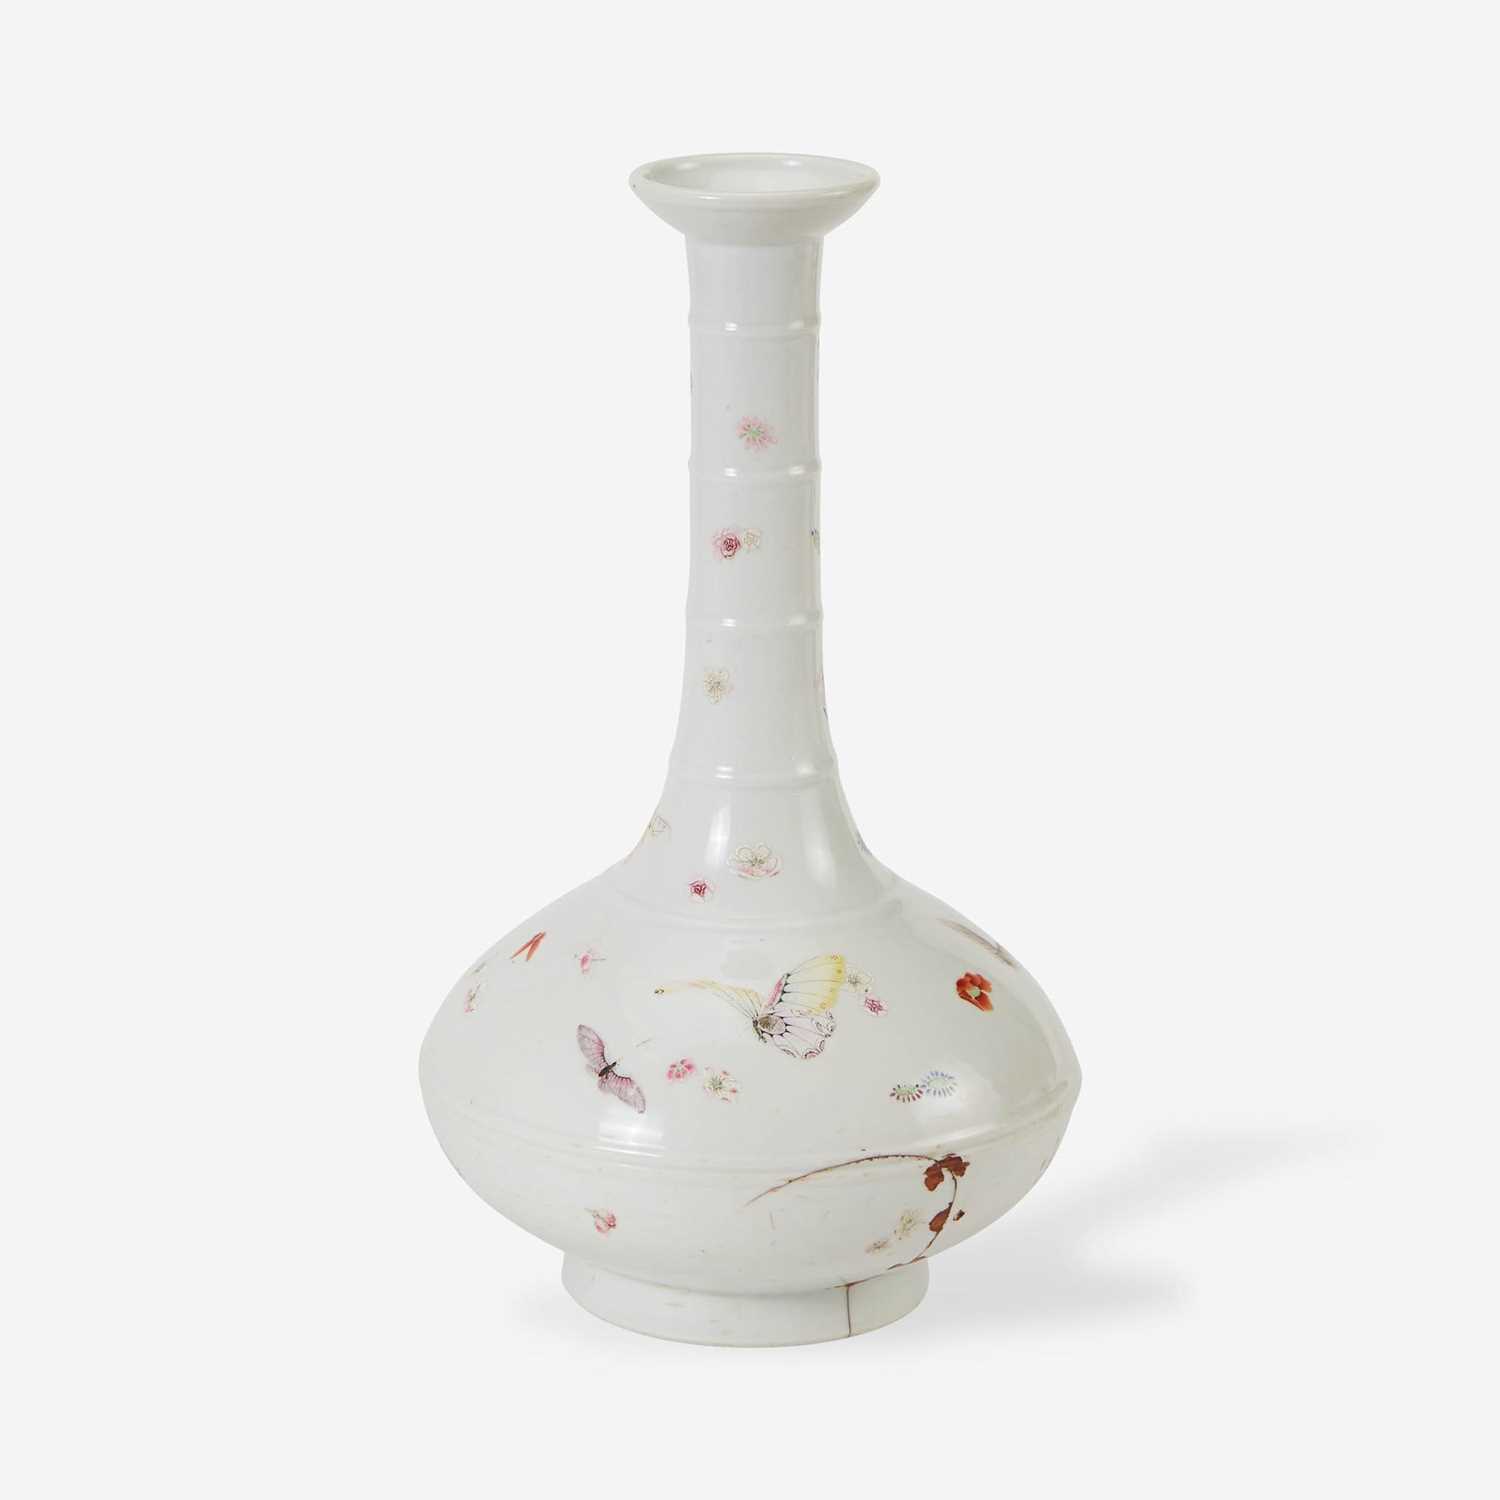 Lot 7 - An unusual Chinese famille rose-decorated "Butterflies and Blossoms" bottle vase 珍罕粉彩长颈瓶